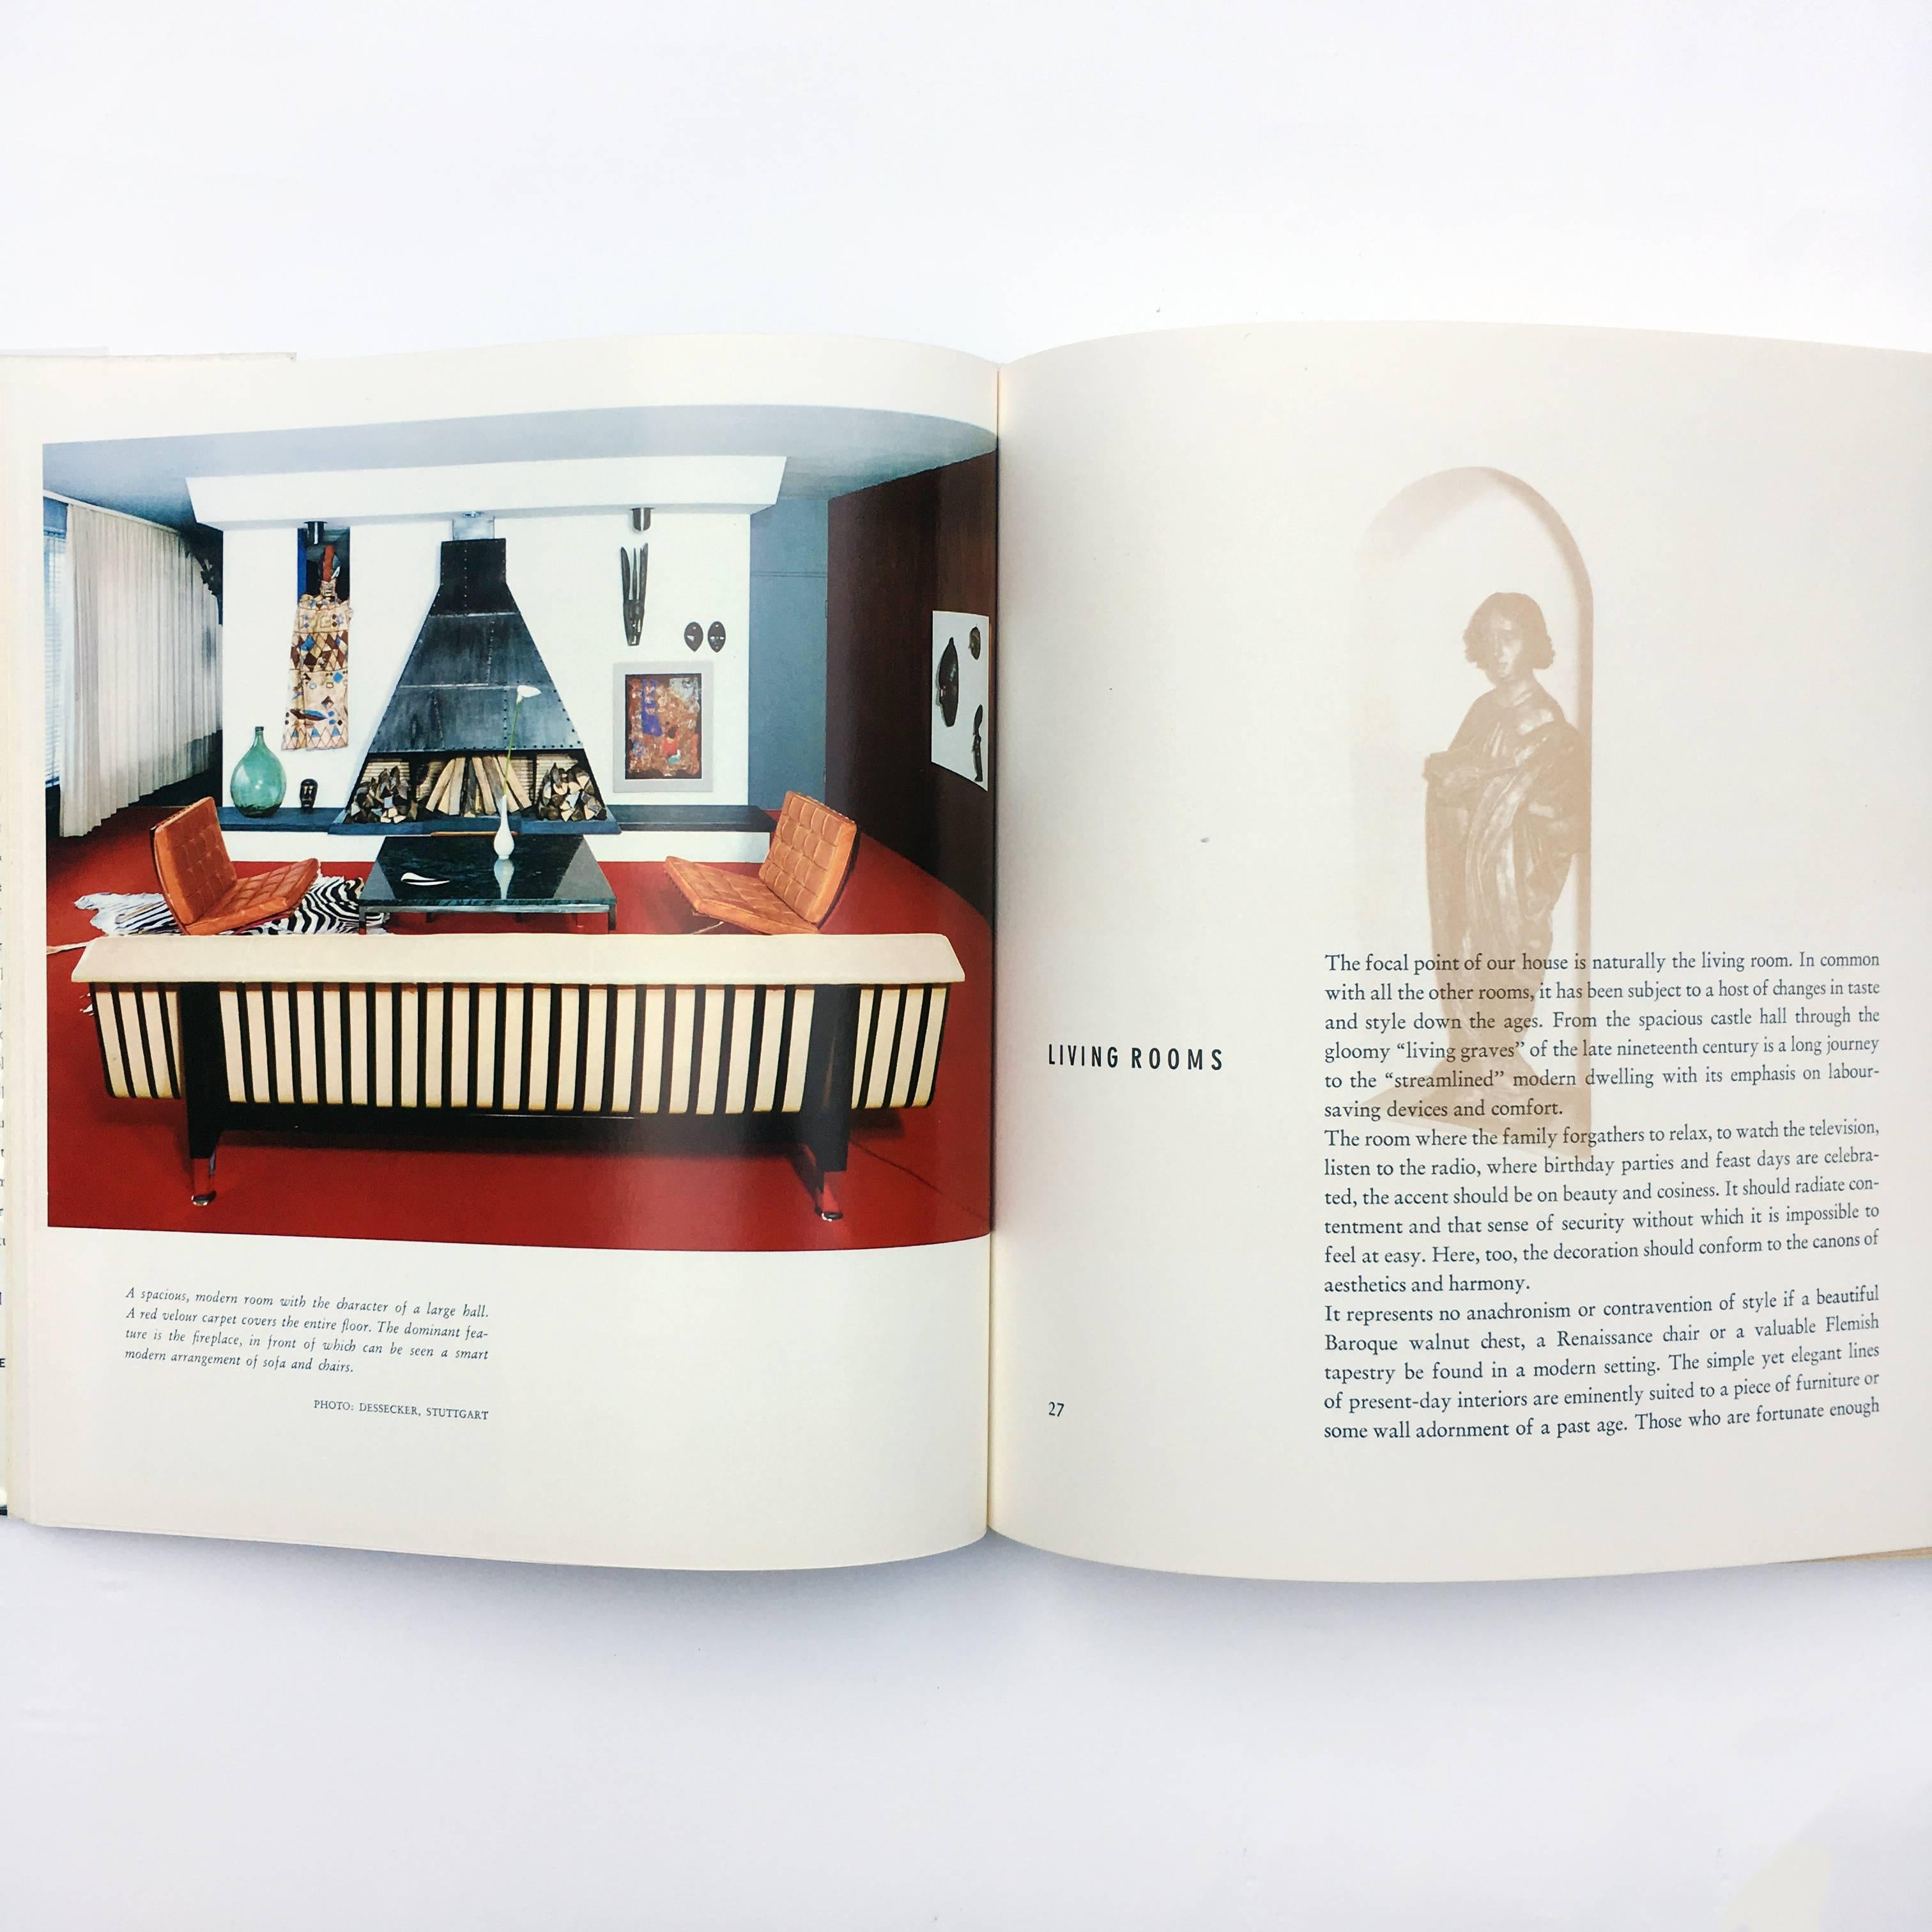 American Interiors for Contemporary Living 1st Edition, 1960 For Sale